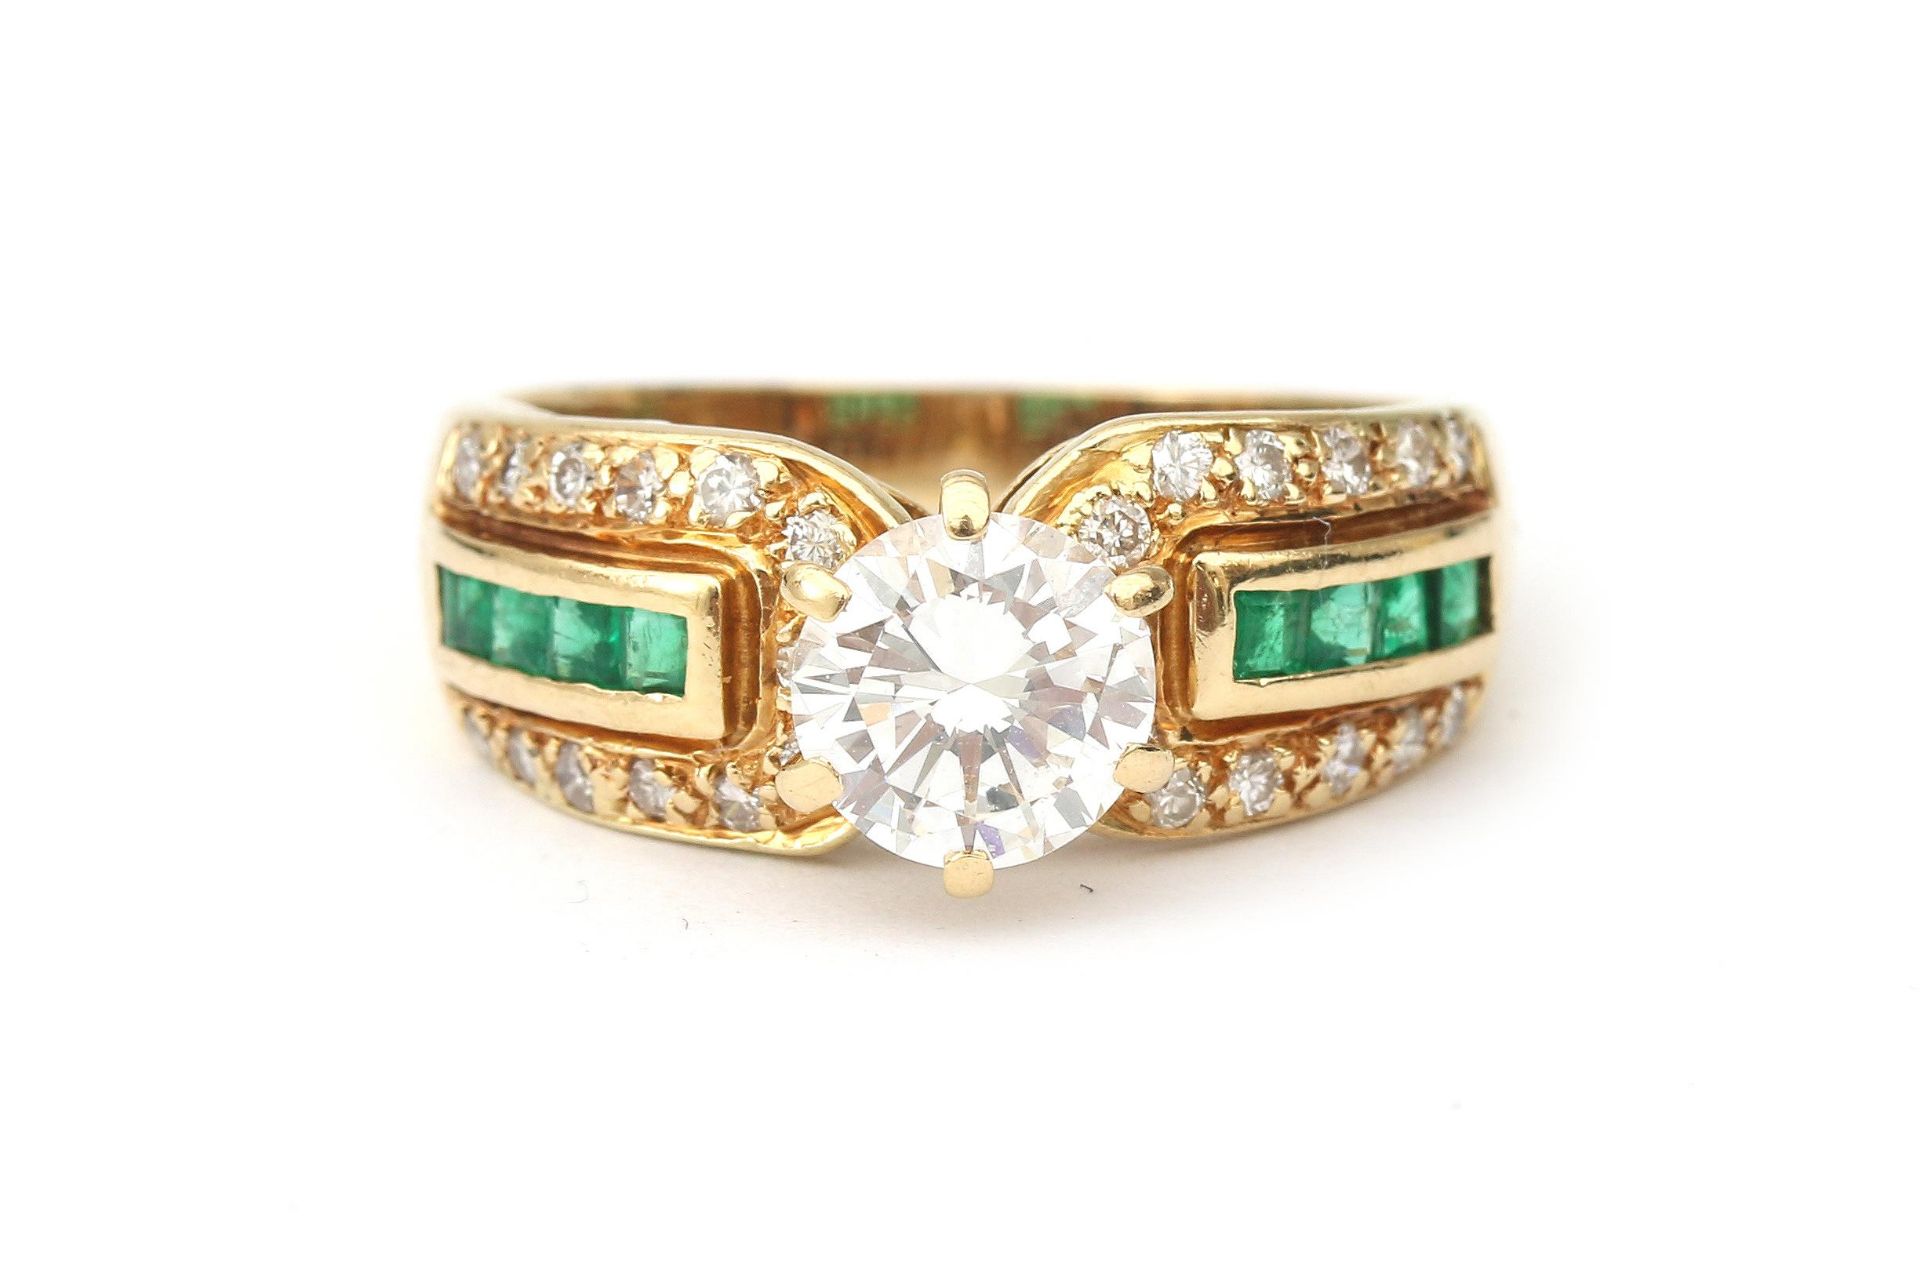 An 18 karat gold emerald and diamond solitaire ring, 1.07 ct.